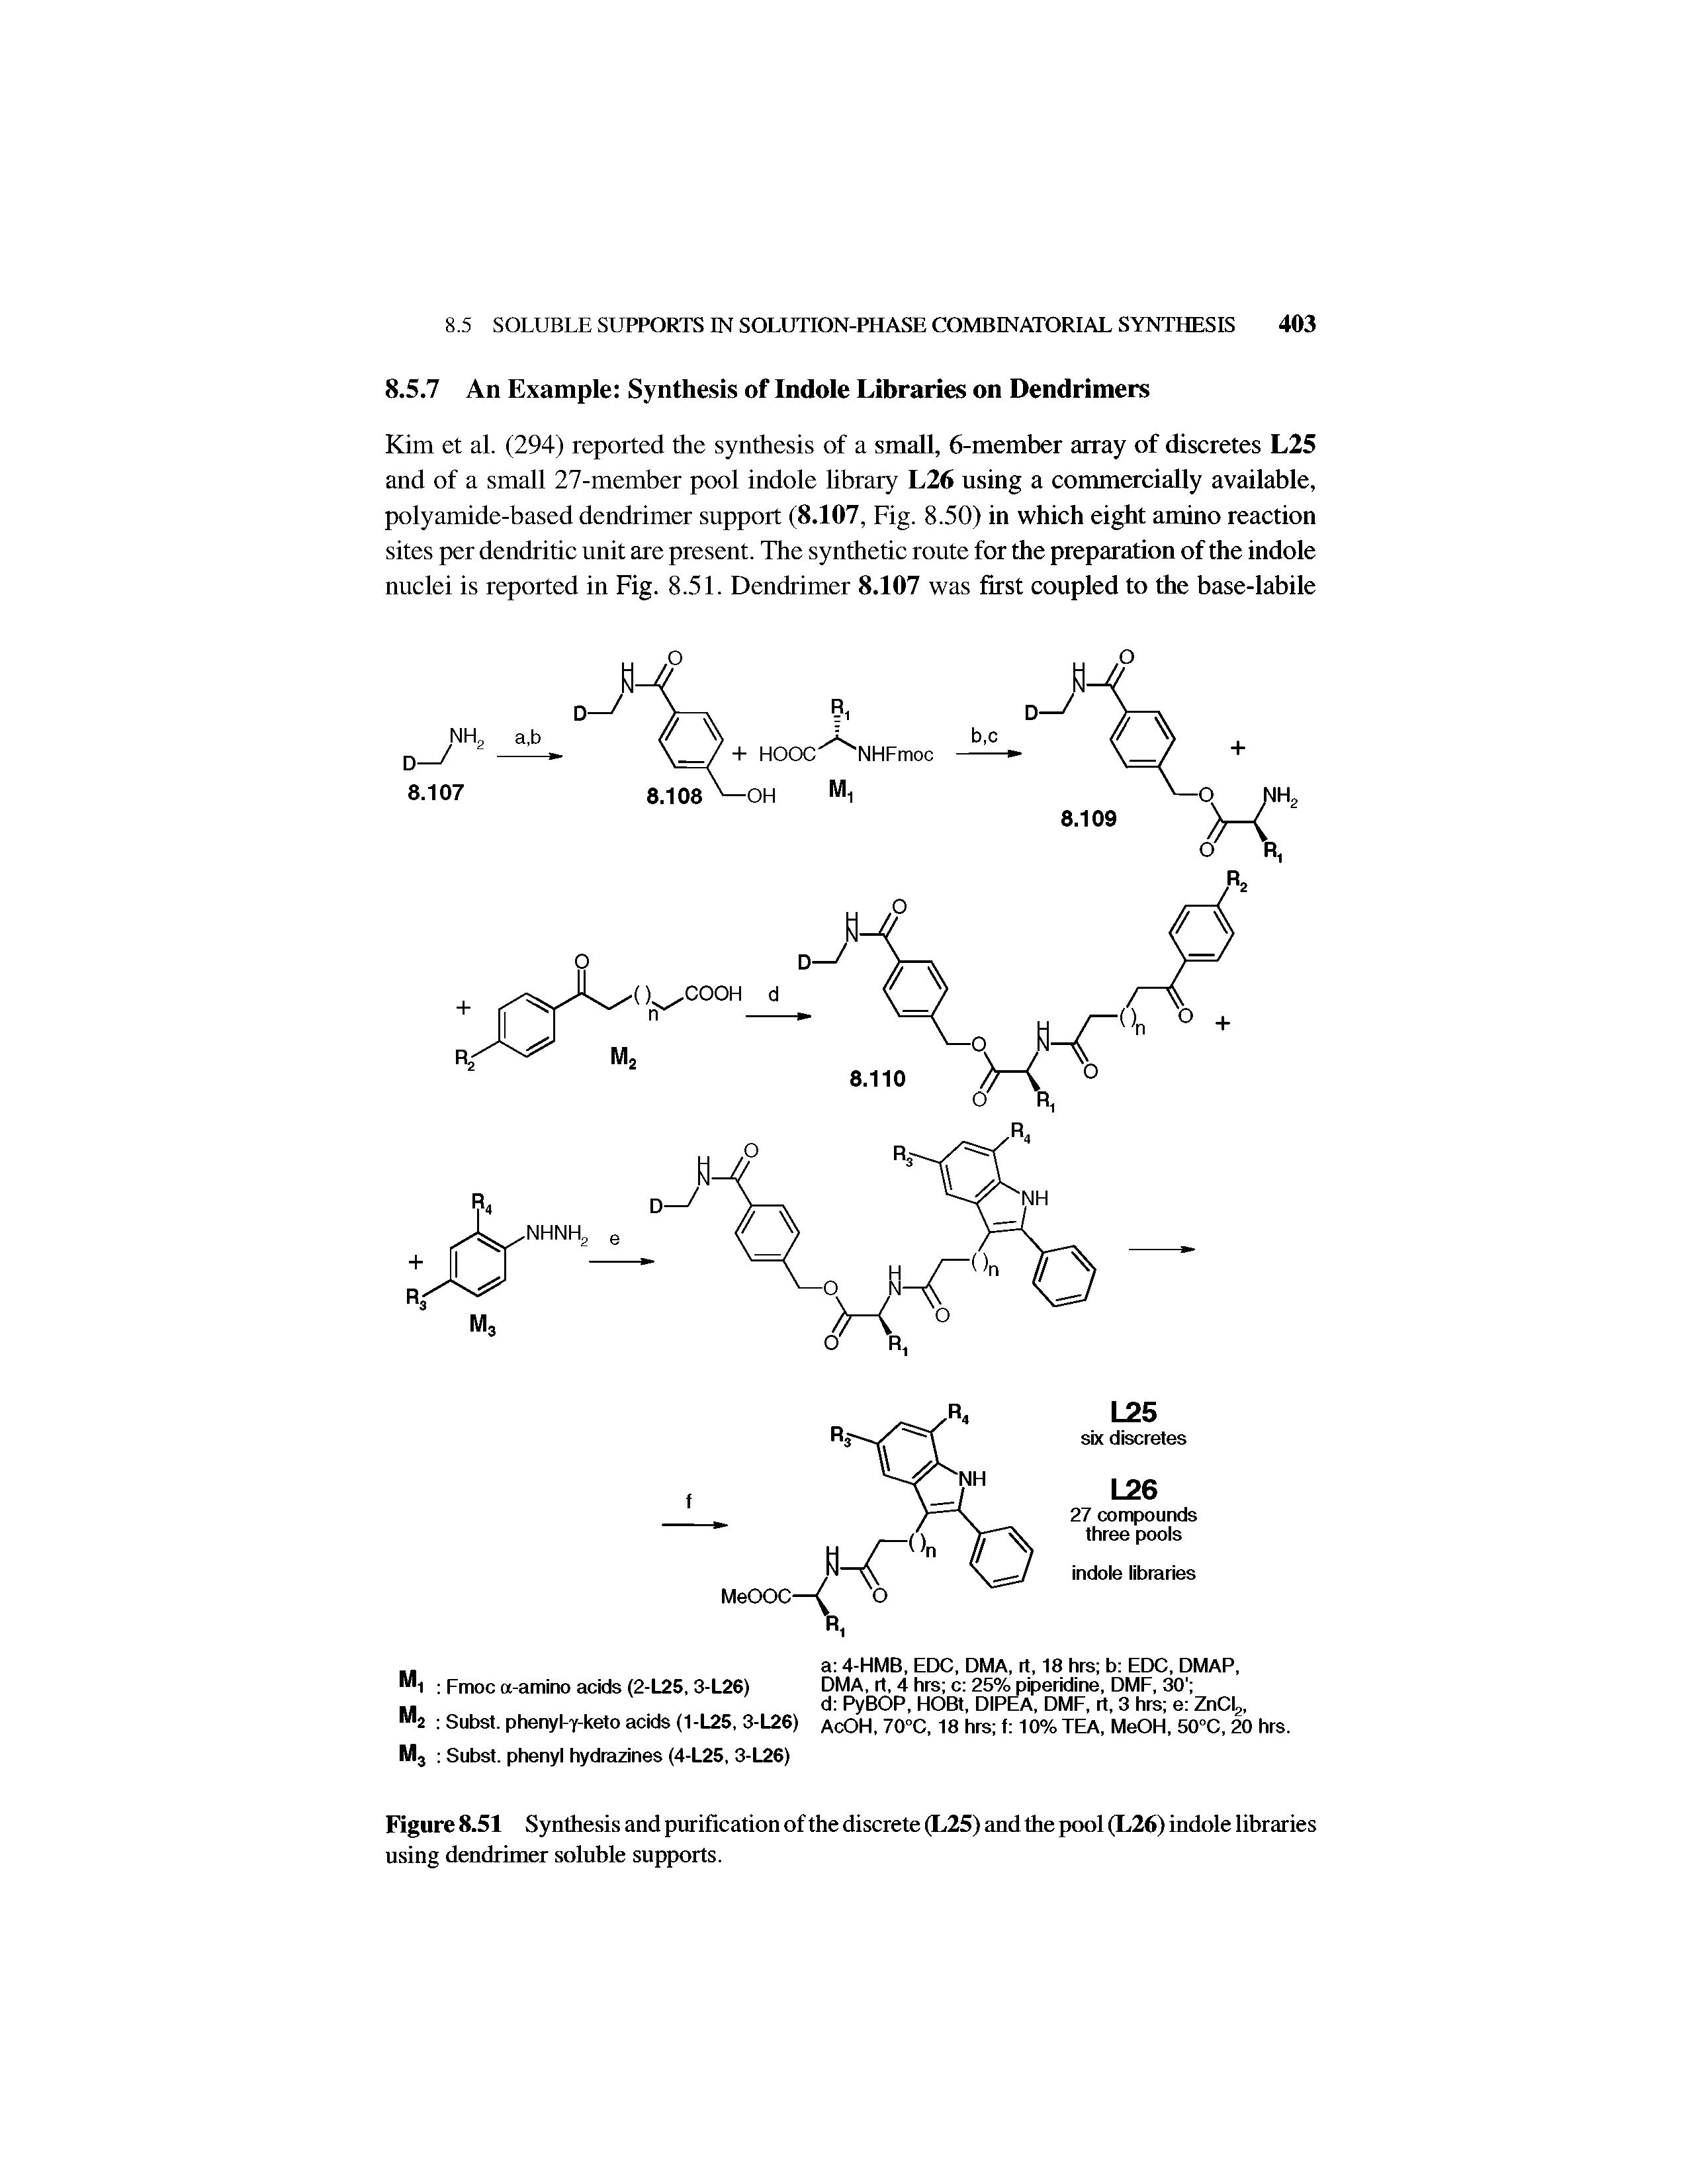 Figure 8.51 Synthesis and purification of the discrete (L25) and the pool (L26) indole libraries using dendrimer soluble supports.